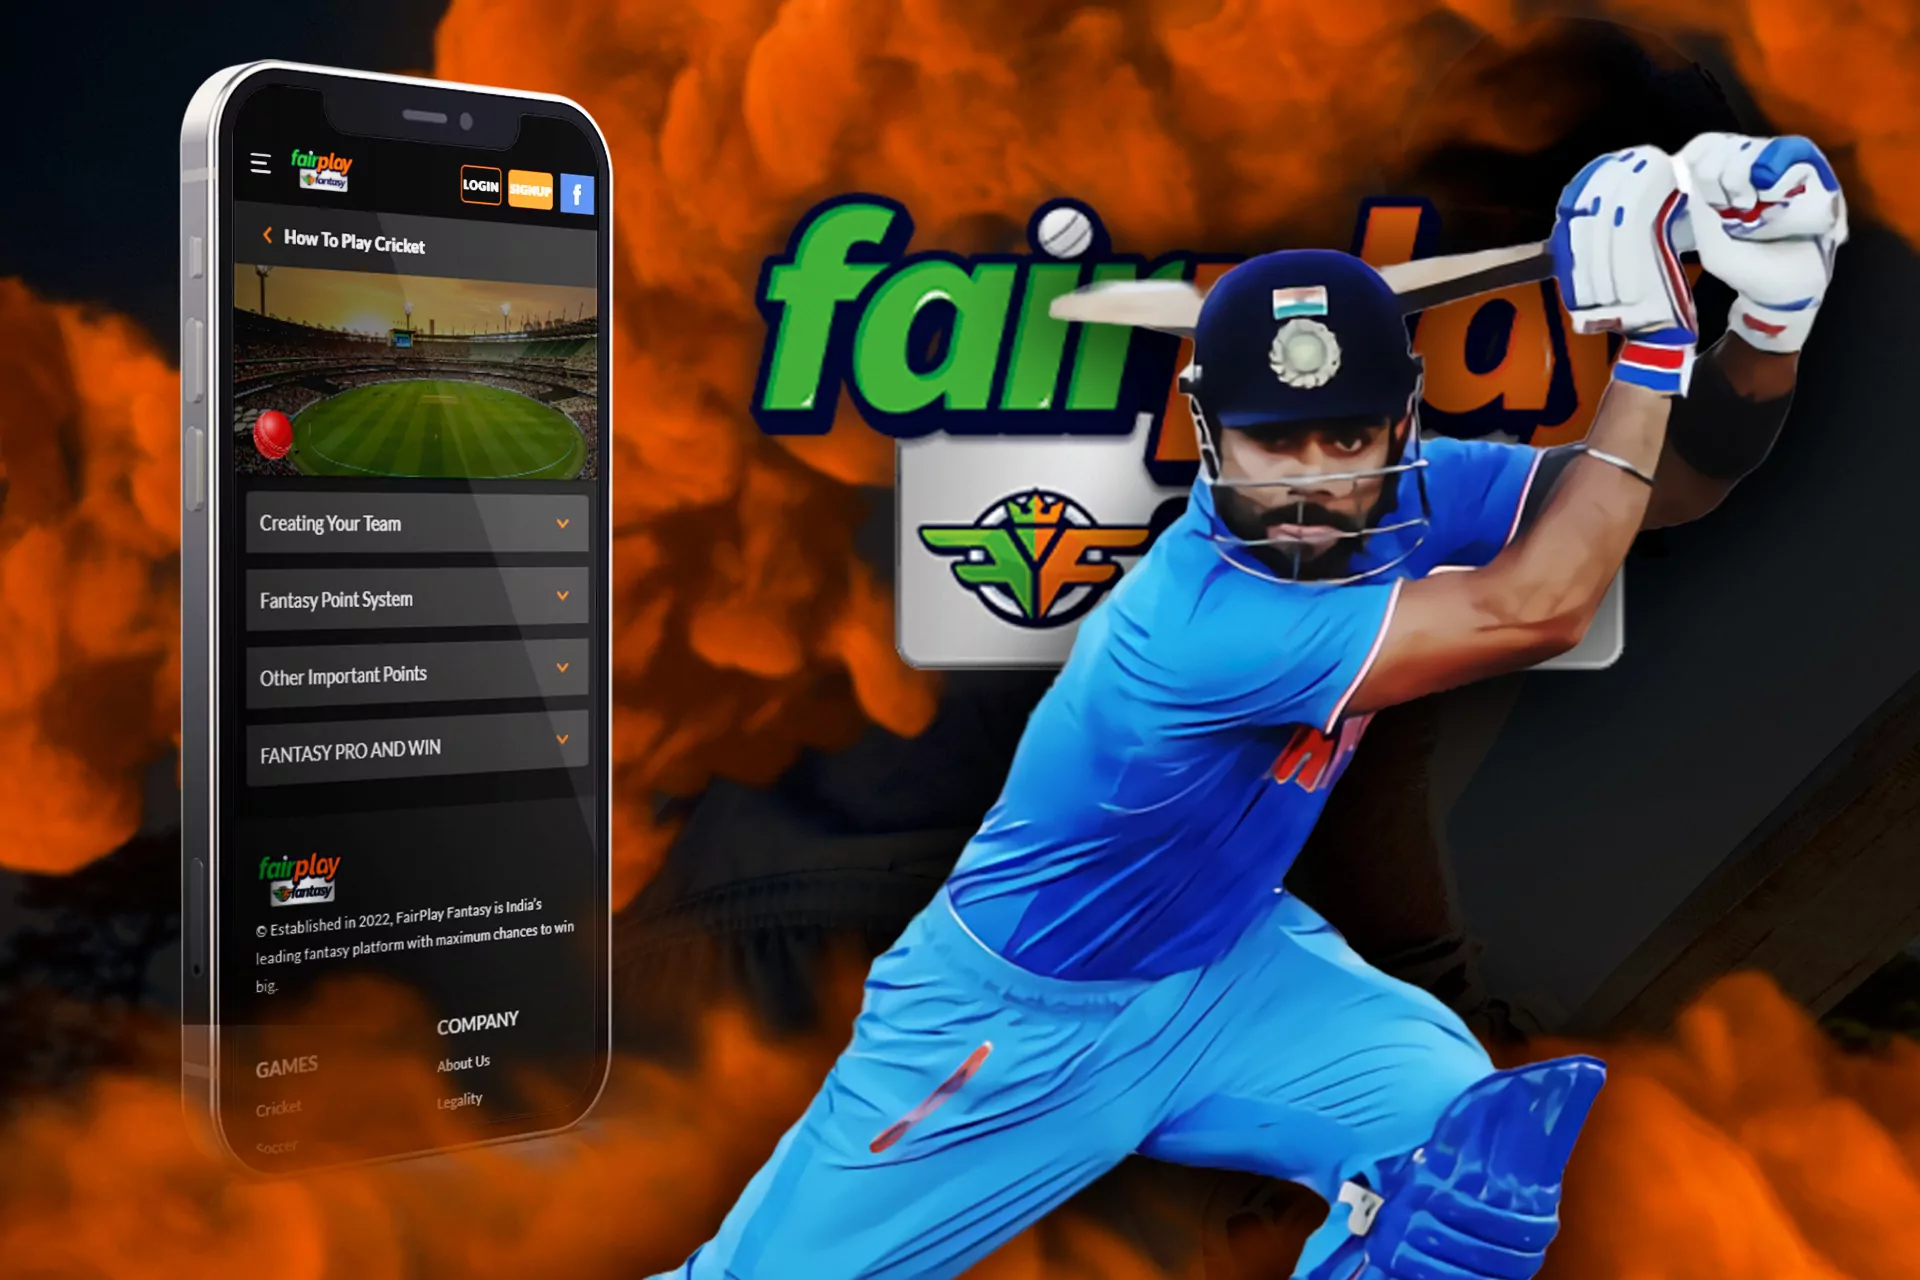 Fantasy cricket is also available for betting on Fairplay.